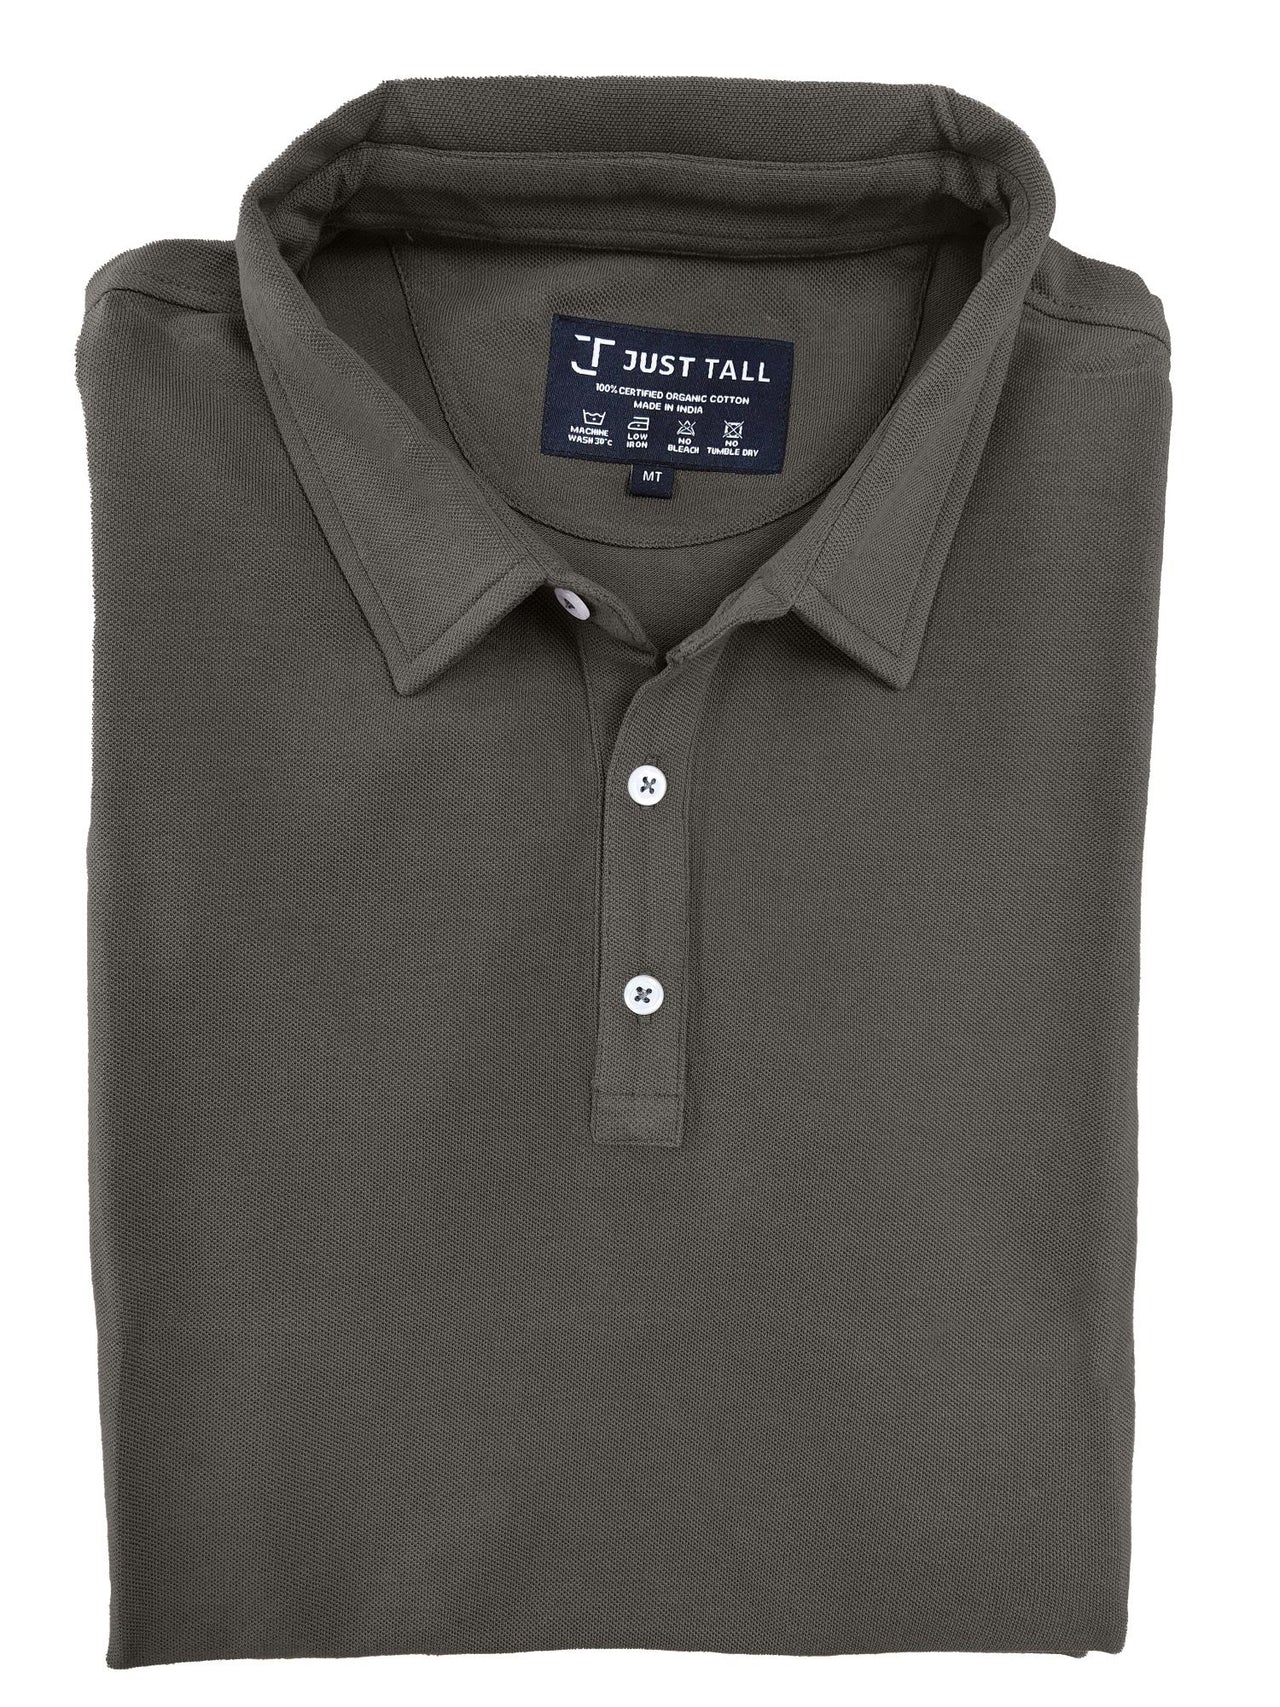 A close up of a grey tall polo shirt.